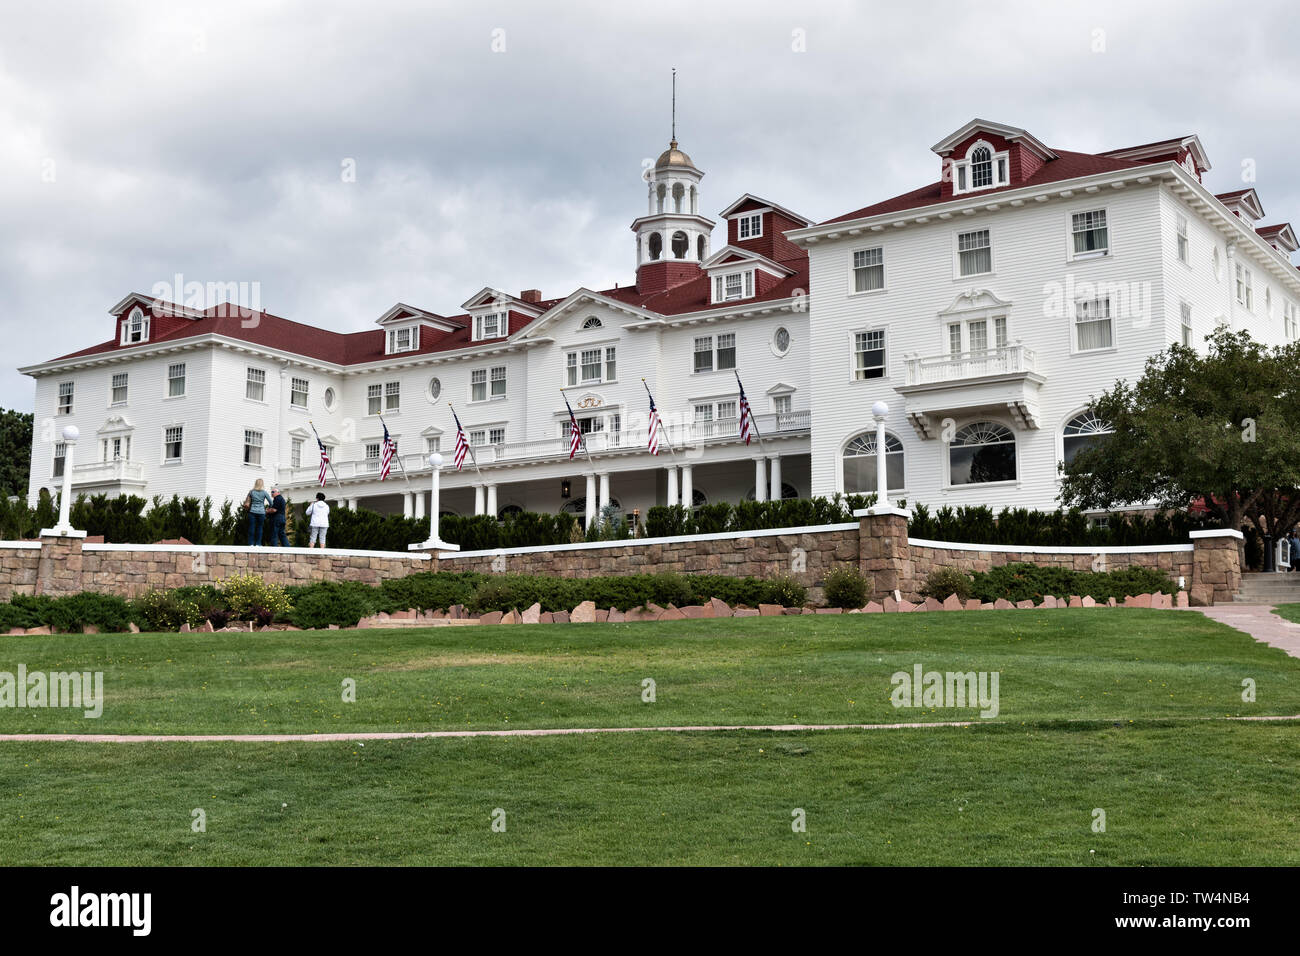 The historic Stanley Hotel, a 142-room Colonial Revival hotel built in 1909, near the entrance to Rocky Mountain National Park in Estes Park, Colorado. The hotel served as the inspiration for the Overlook Hotel in the Stephen King bestselling novel The Shining. Stock Photo